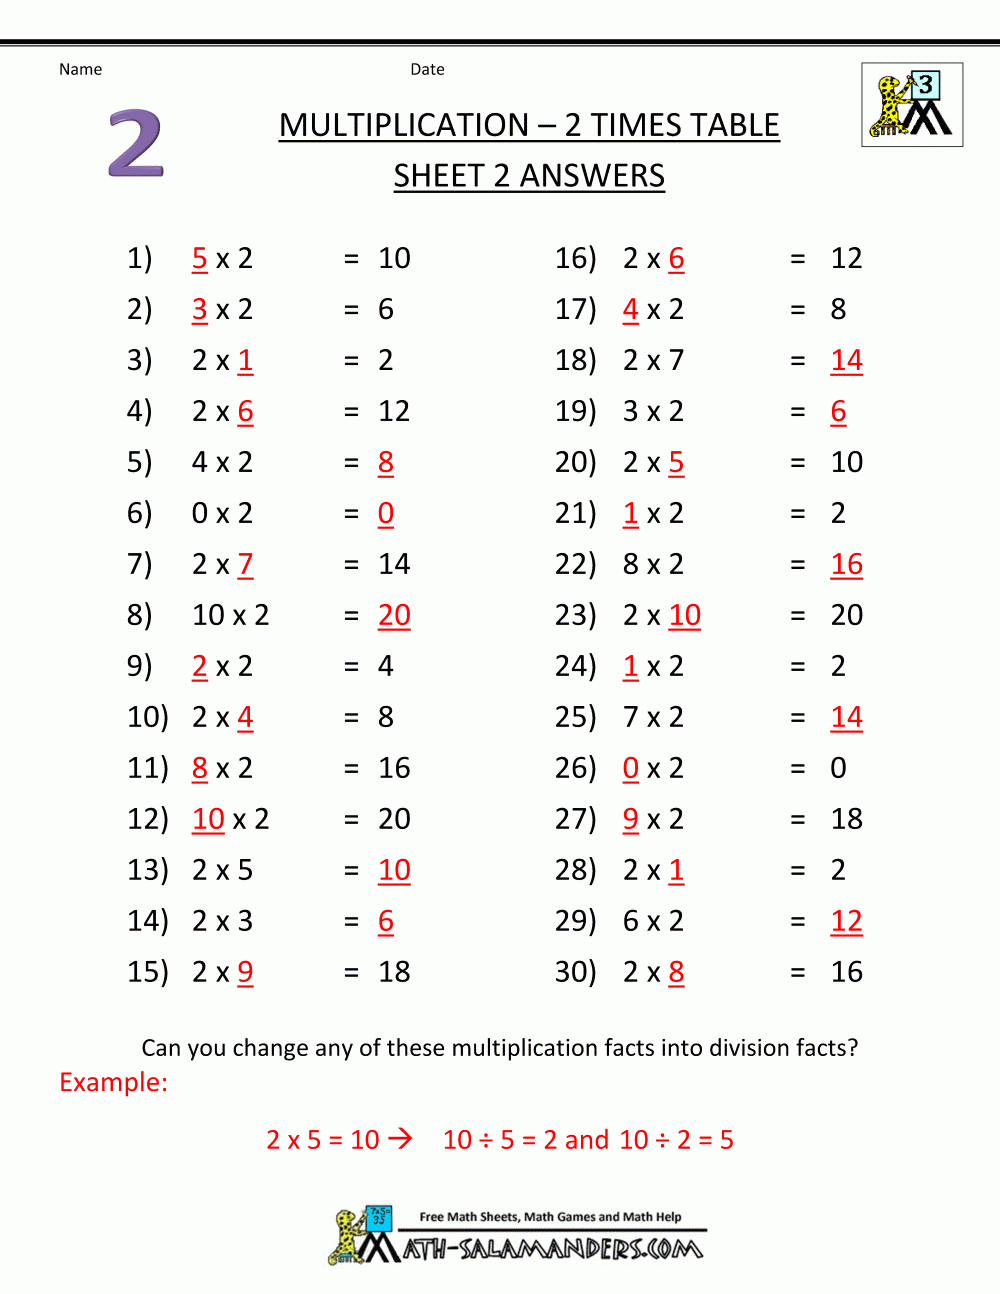 Multiplication-Drill-Sheets-2-Times-Table-2Ans.gif 1,000